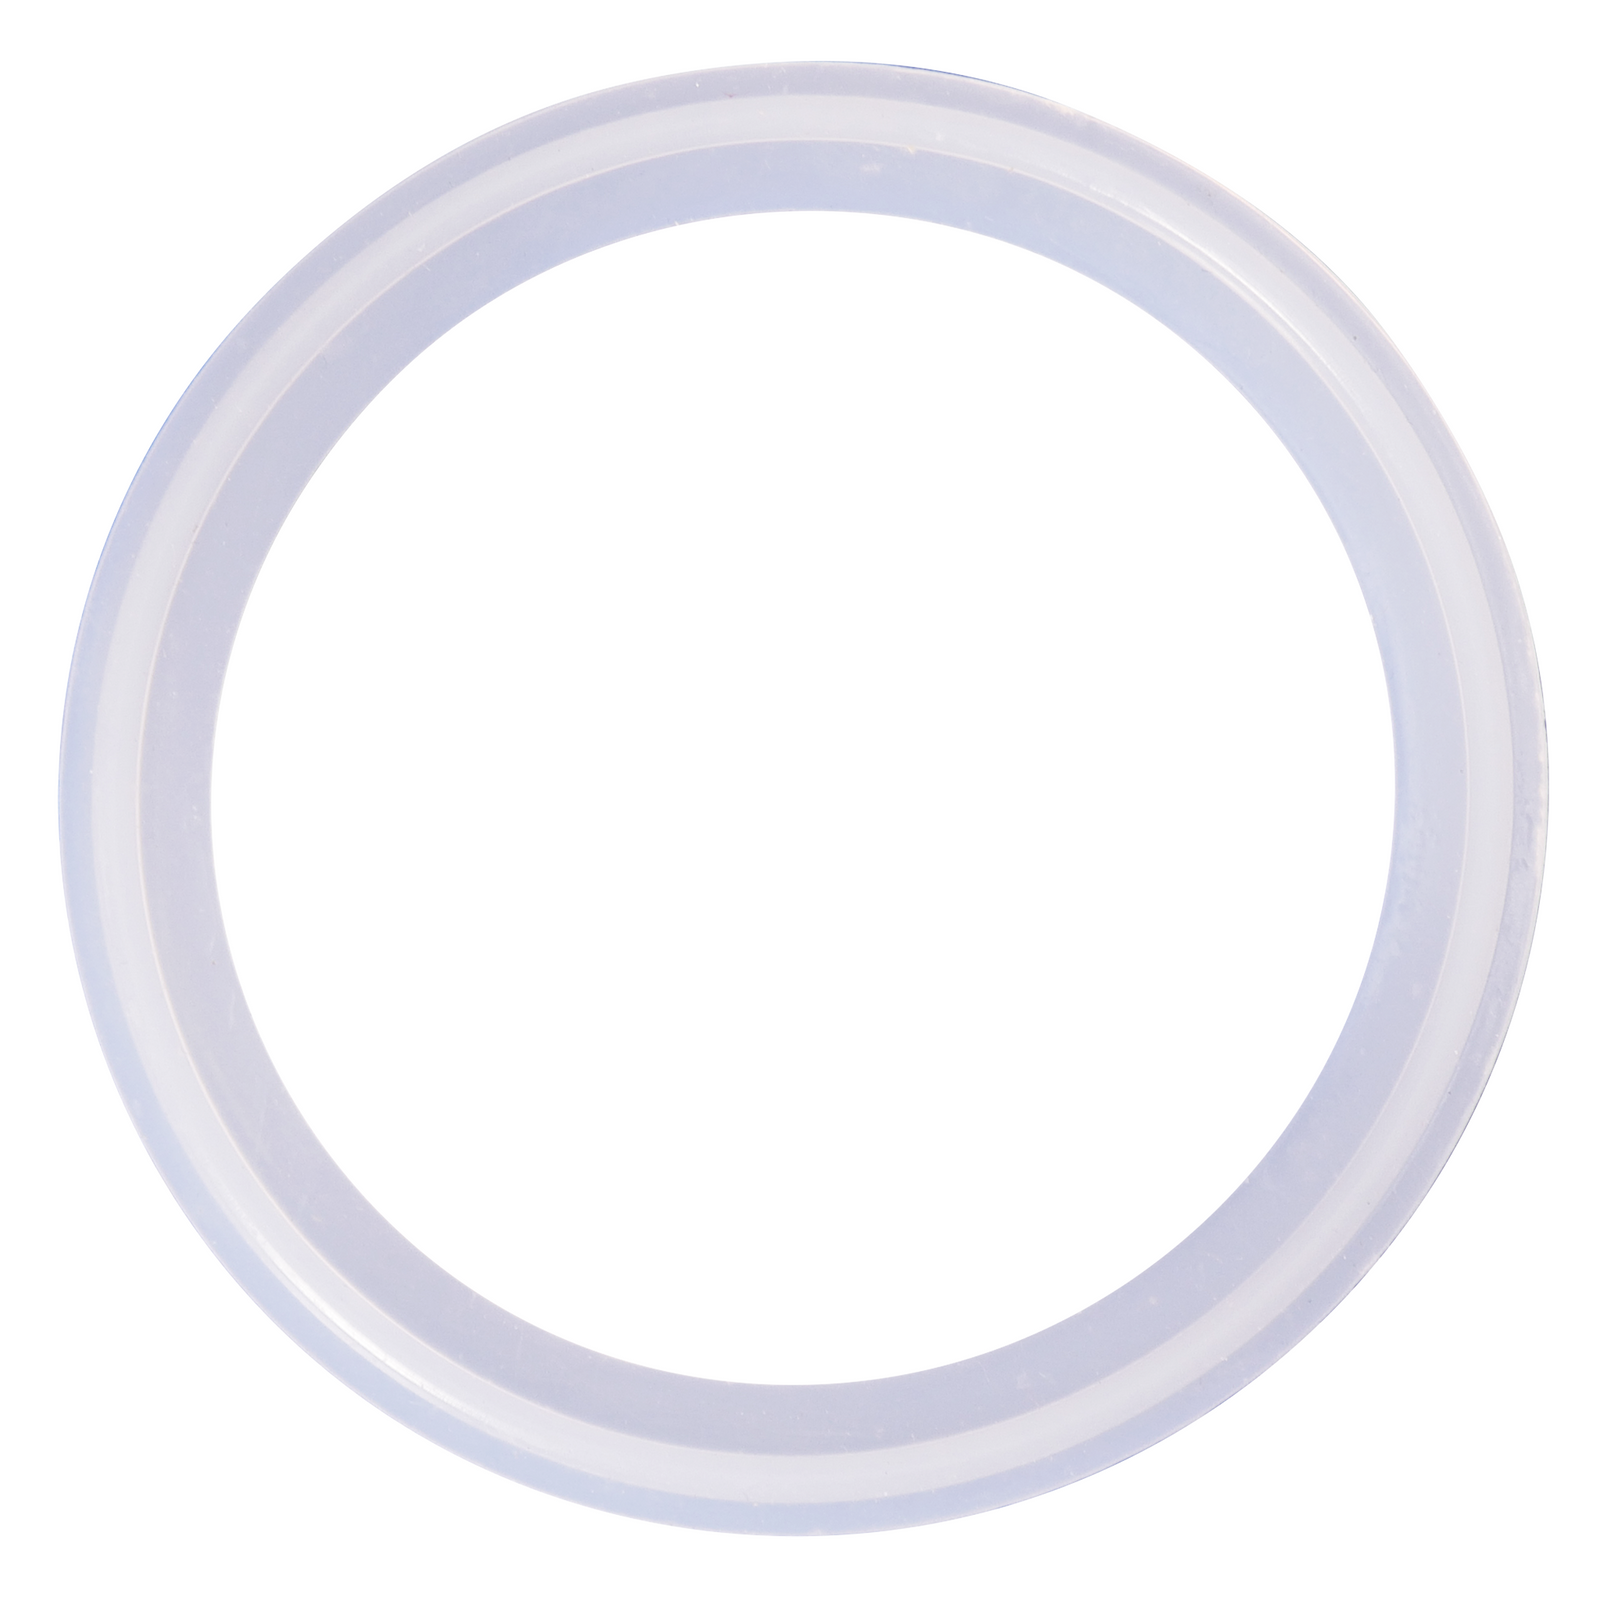 3 inch white silicone gasket